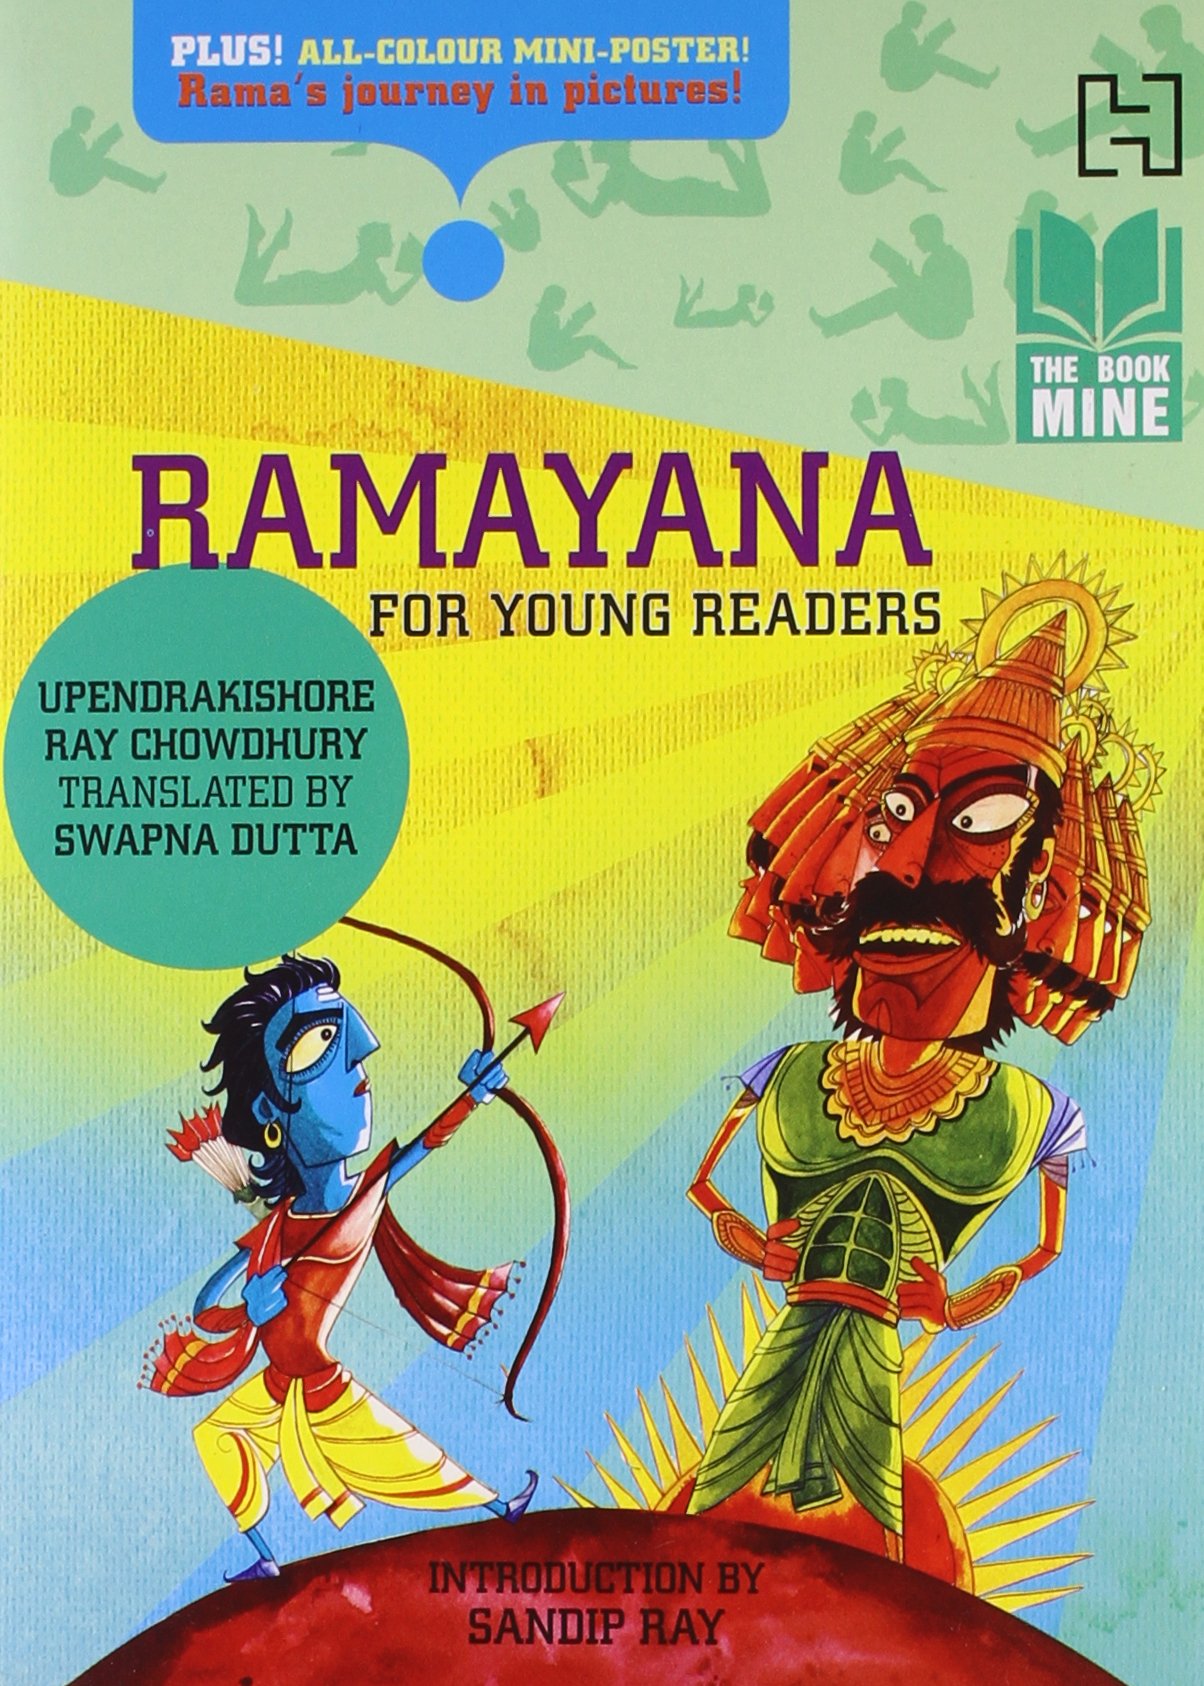 The Book Mine: Ramayana For Young Readers